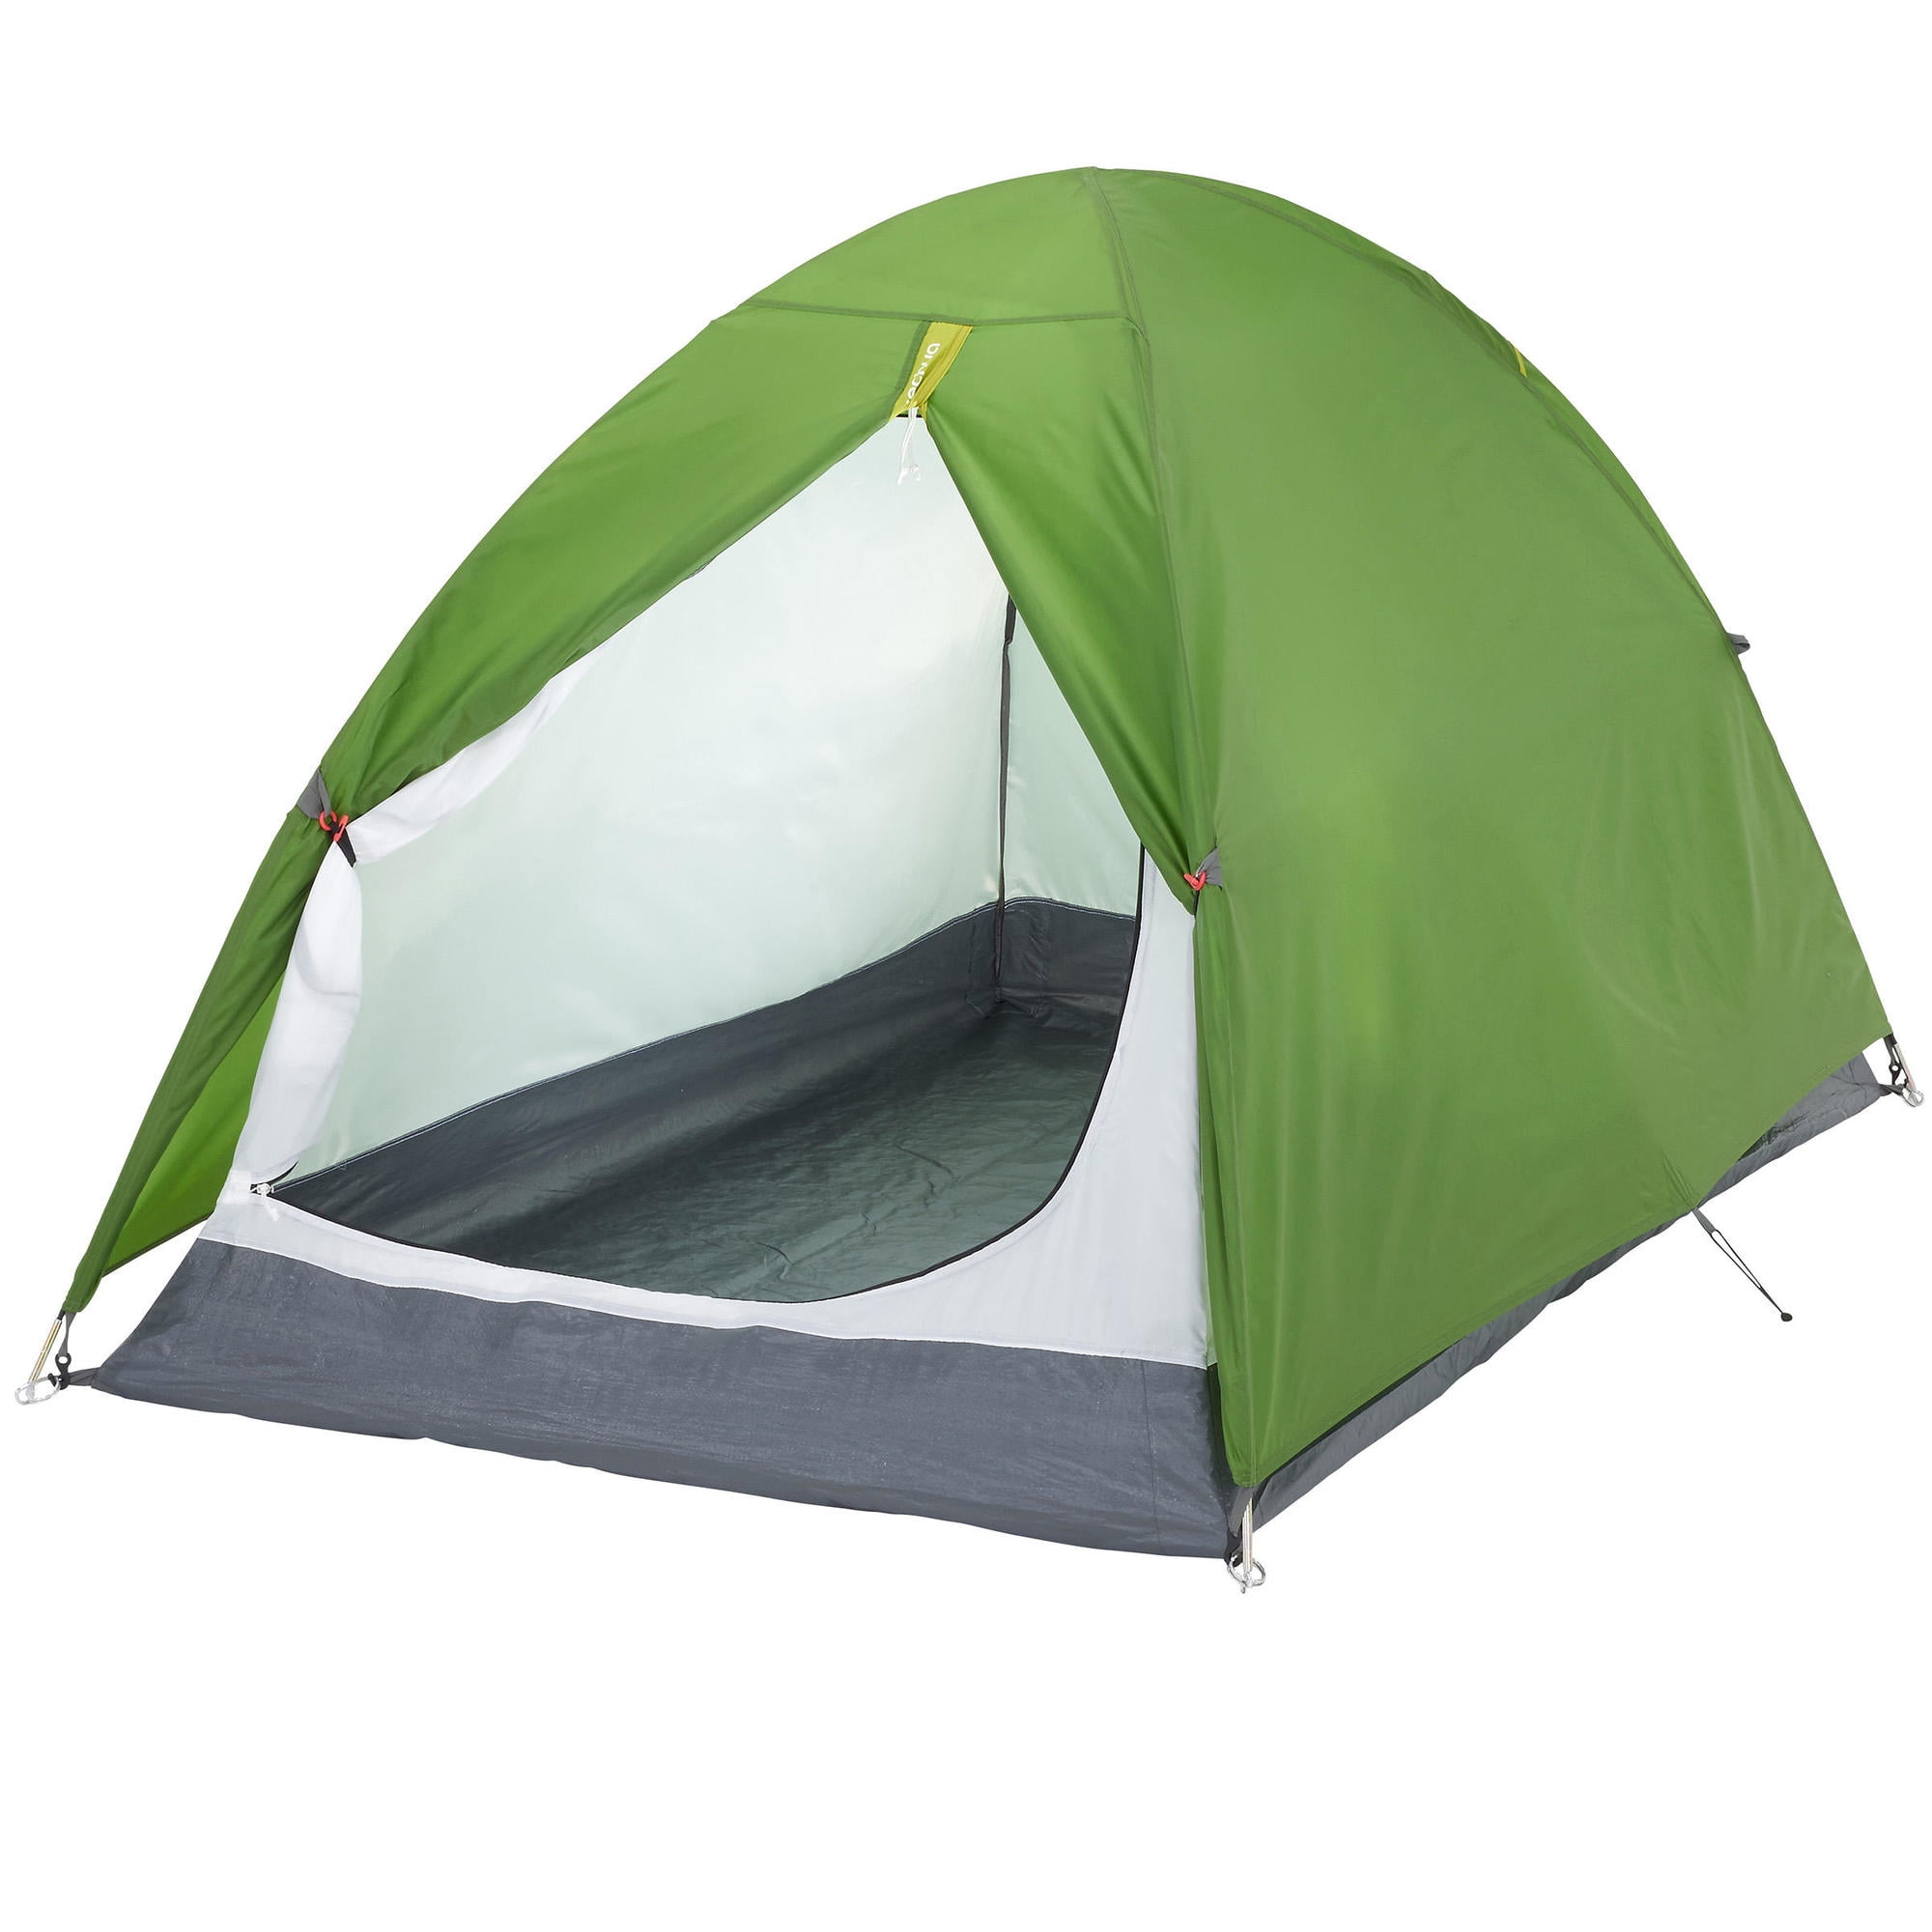 Quechua by DECATHLON - Camping Tent Arpenaz 2 - 2 Person - Green